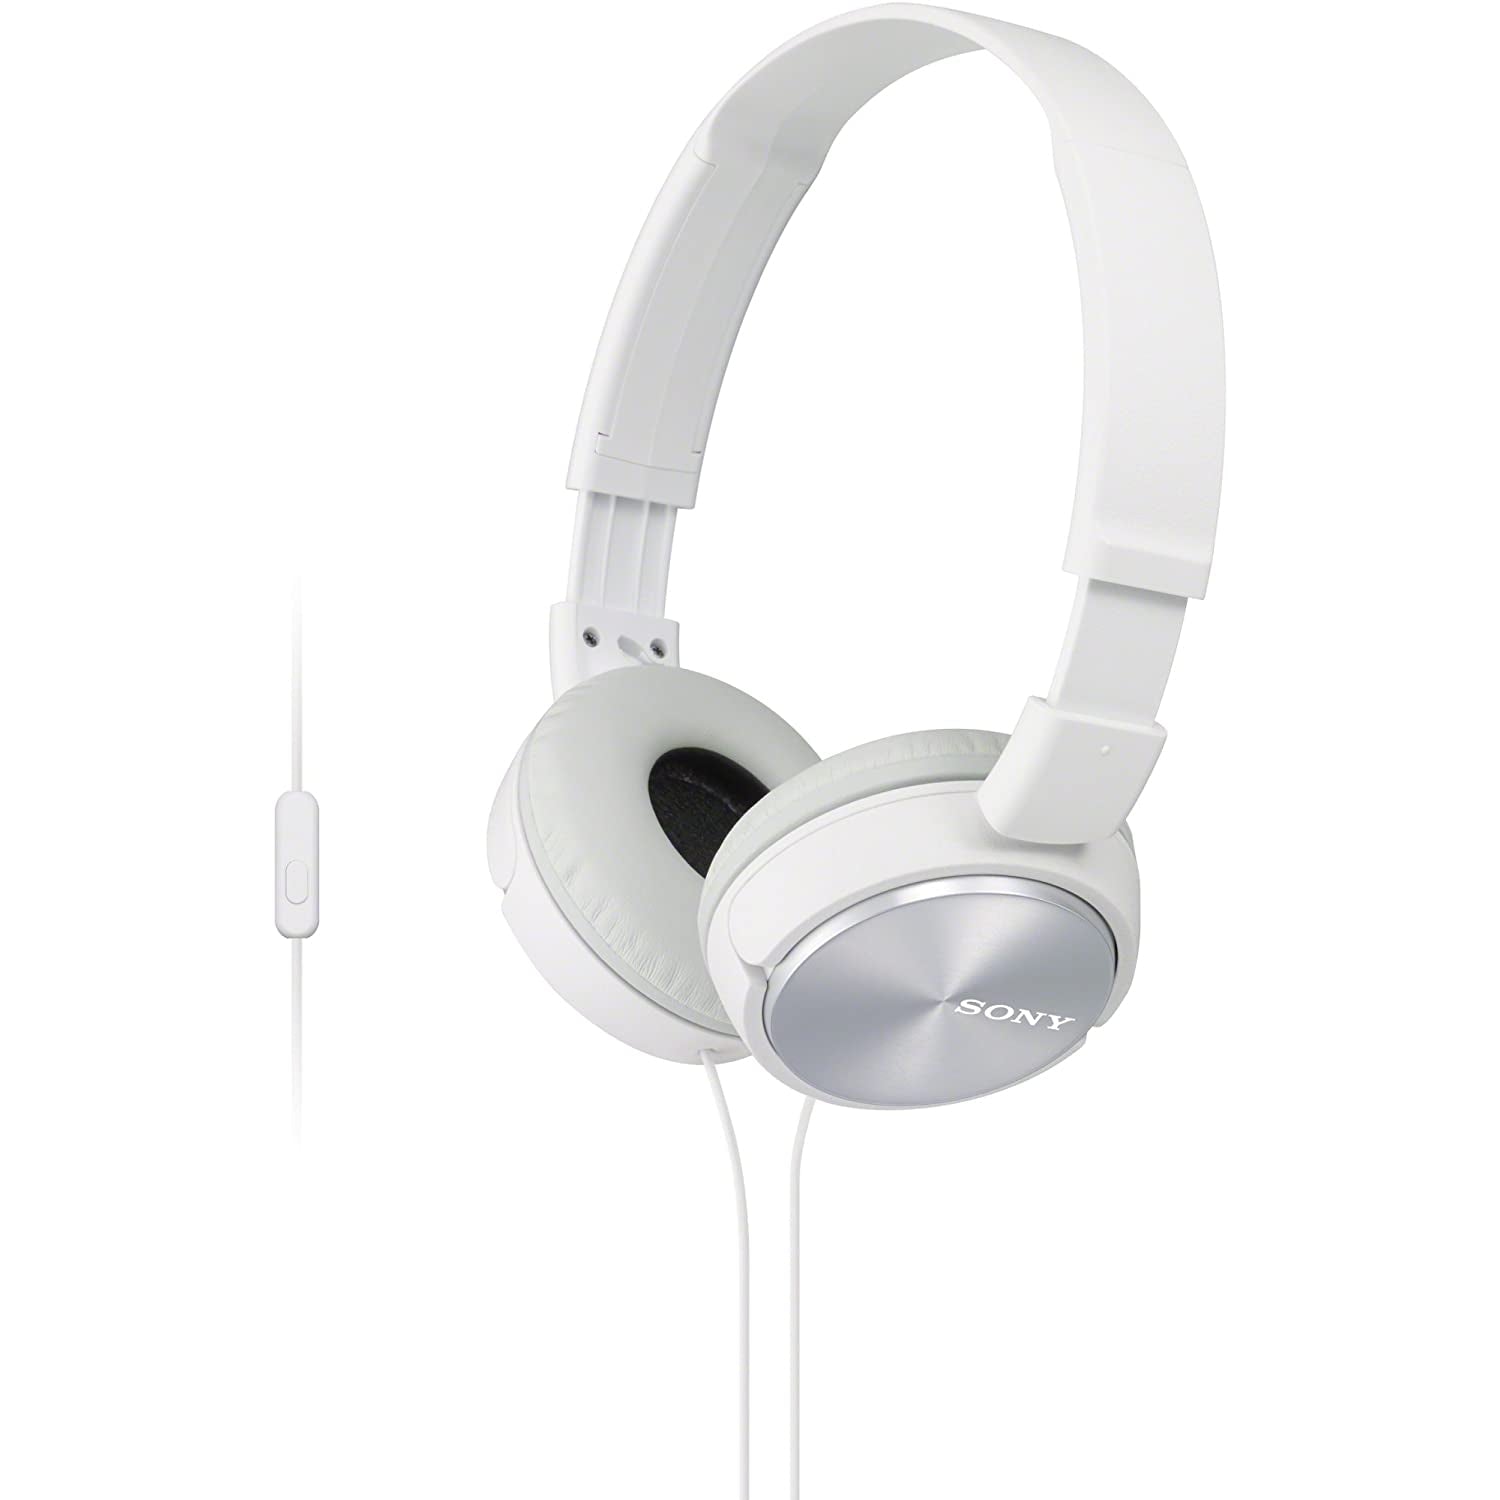 Sony MDR-ZX310AP Foldable Wired Headphones - White - Refurbished Pristine